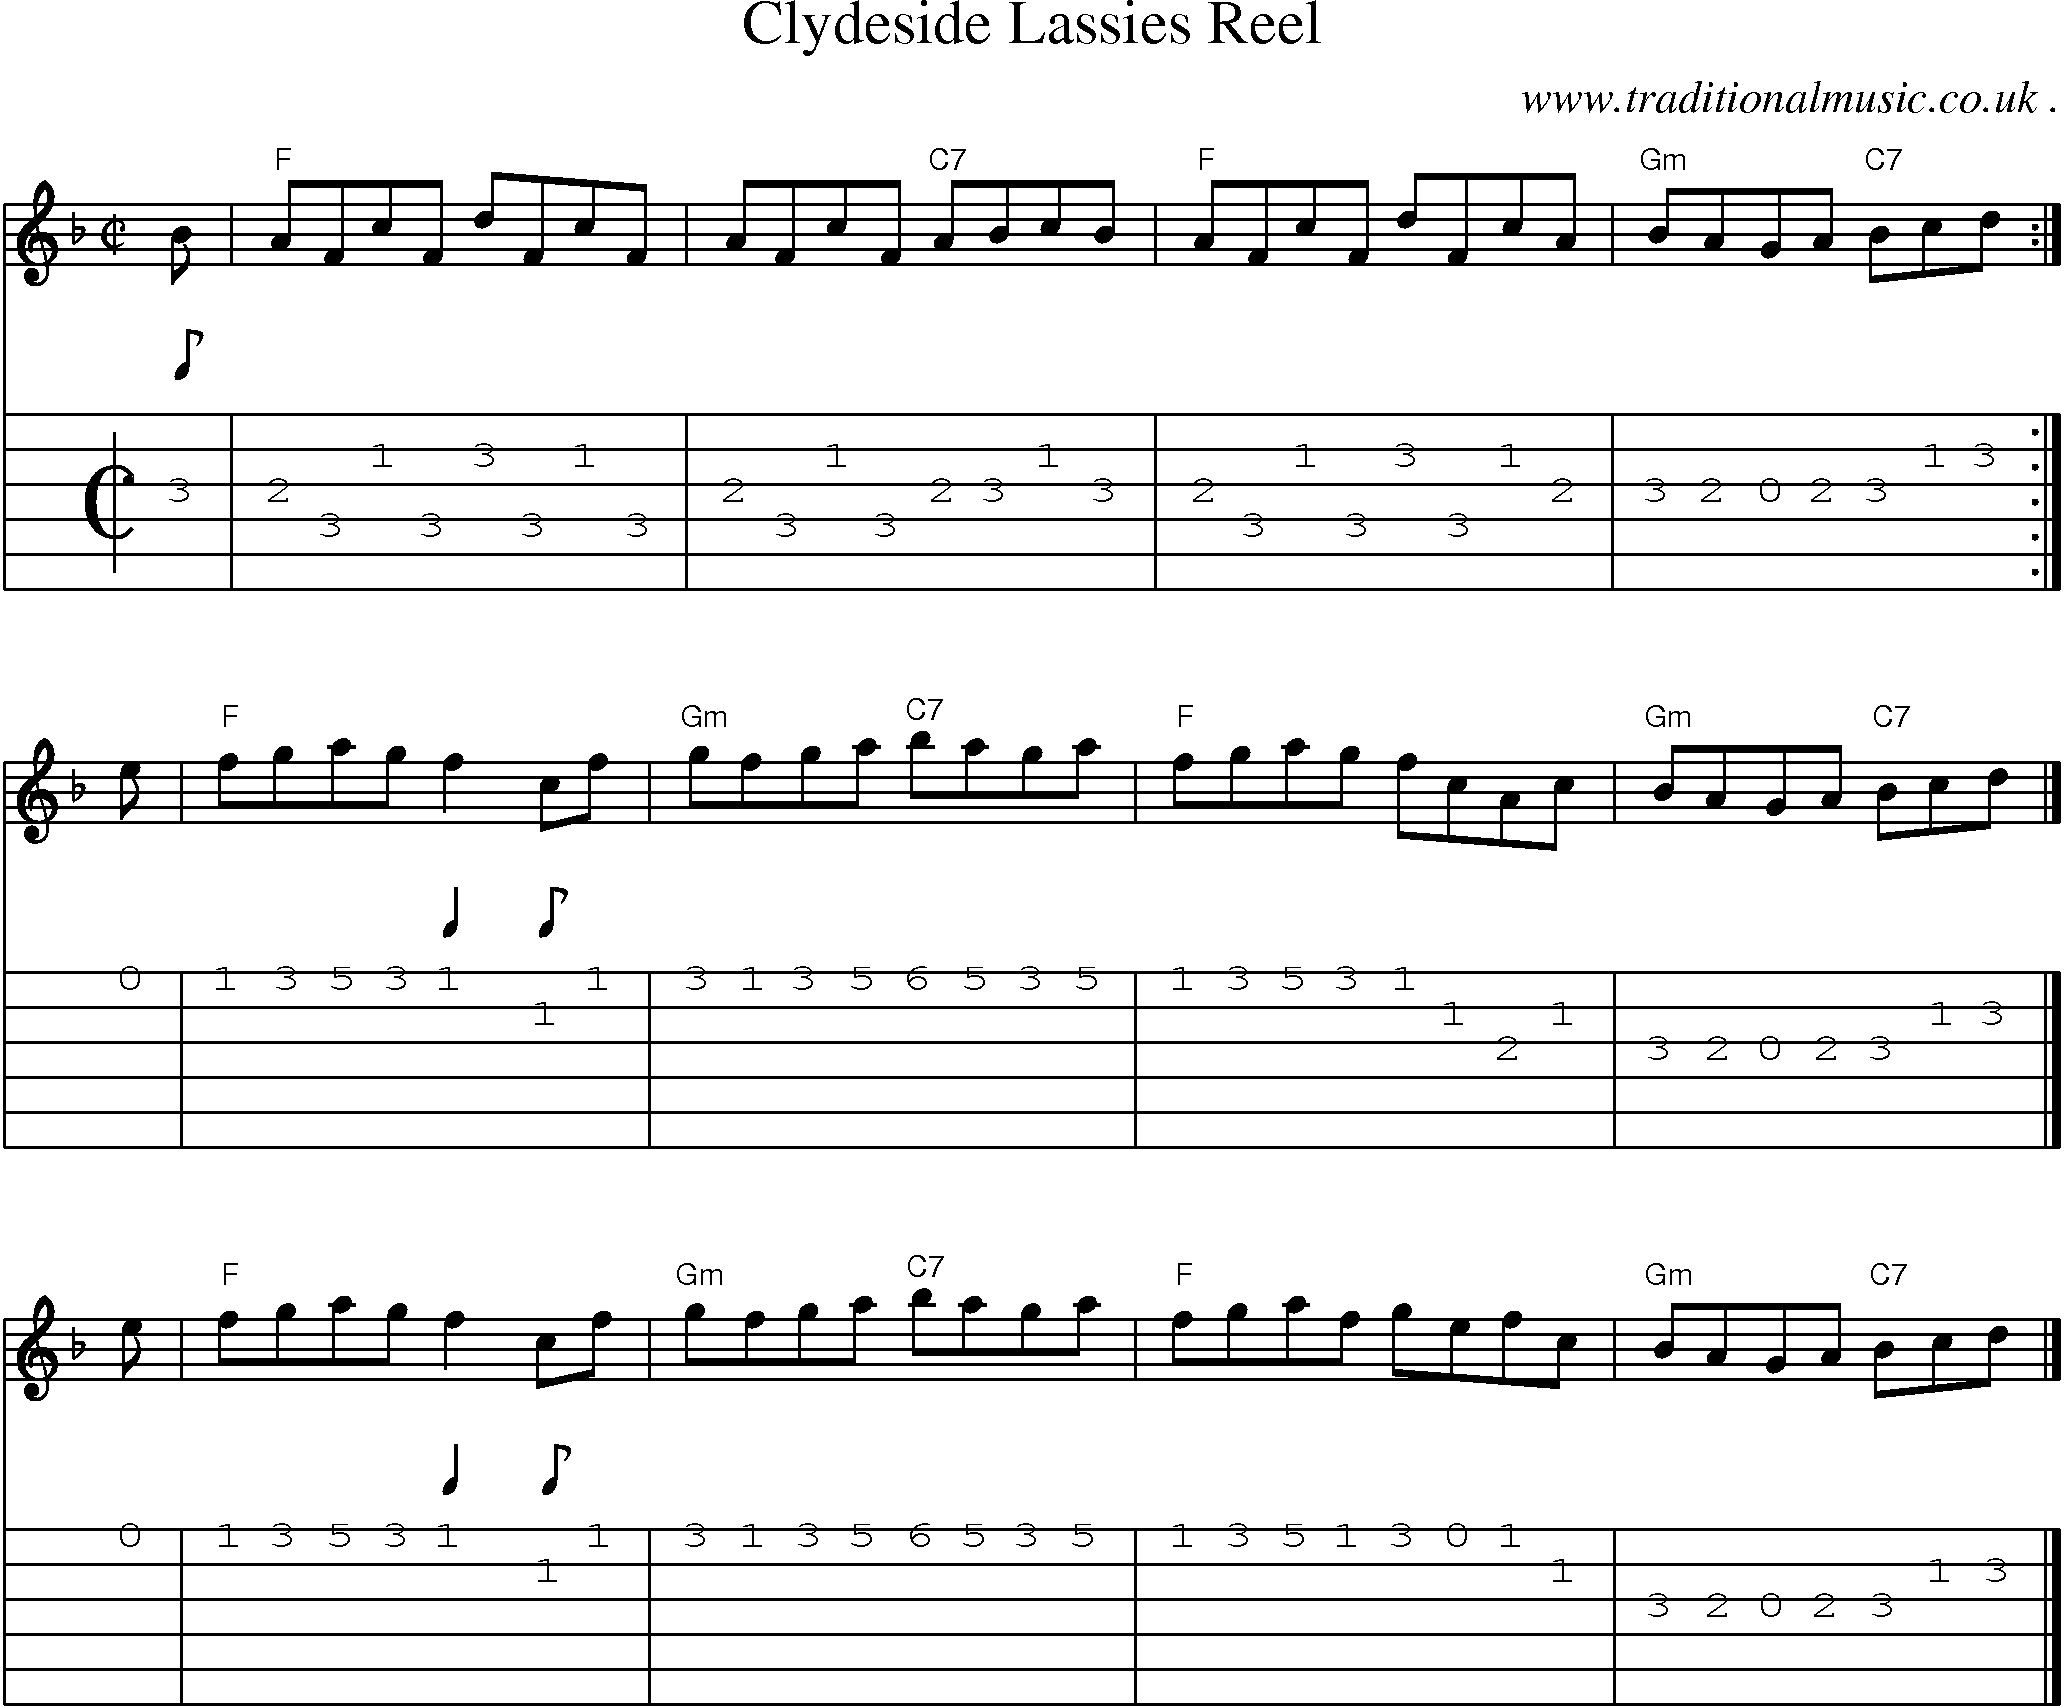 Sheet-music  score, Chords and Guitar Tabs for Clydeside Lassies Reel